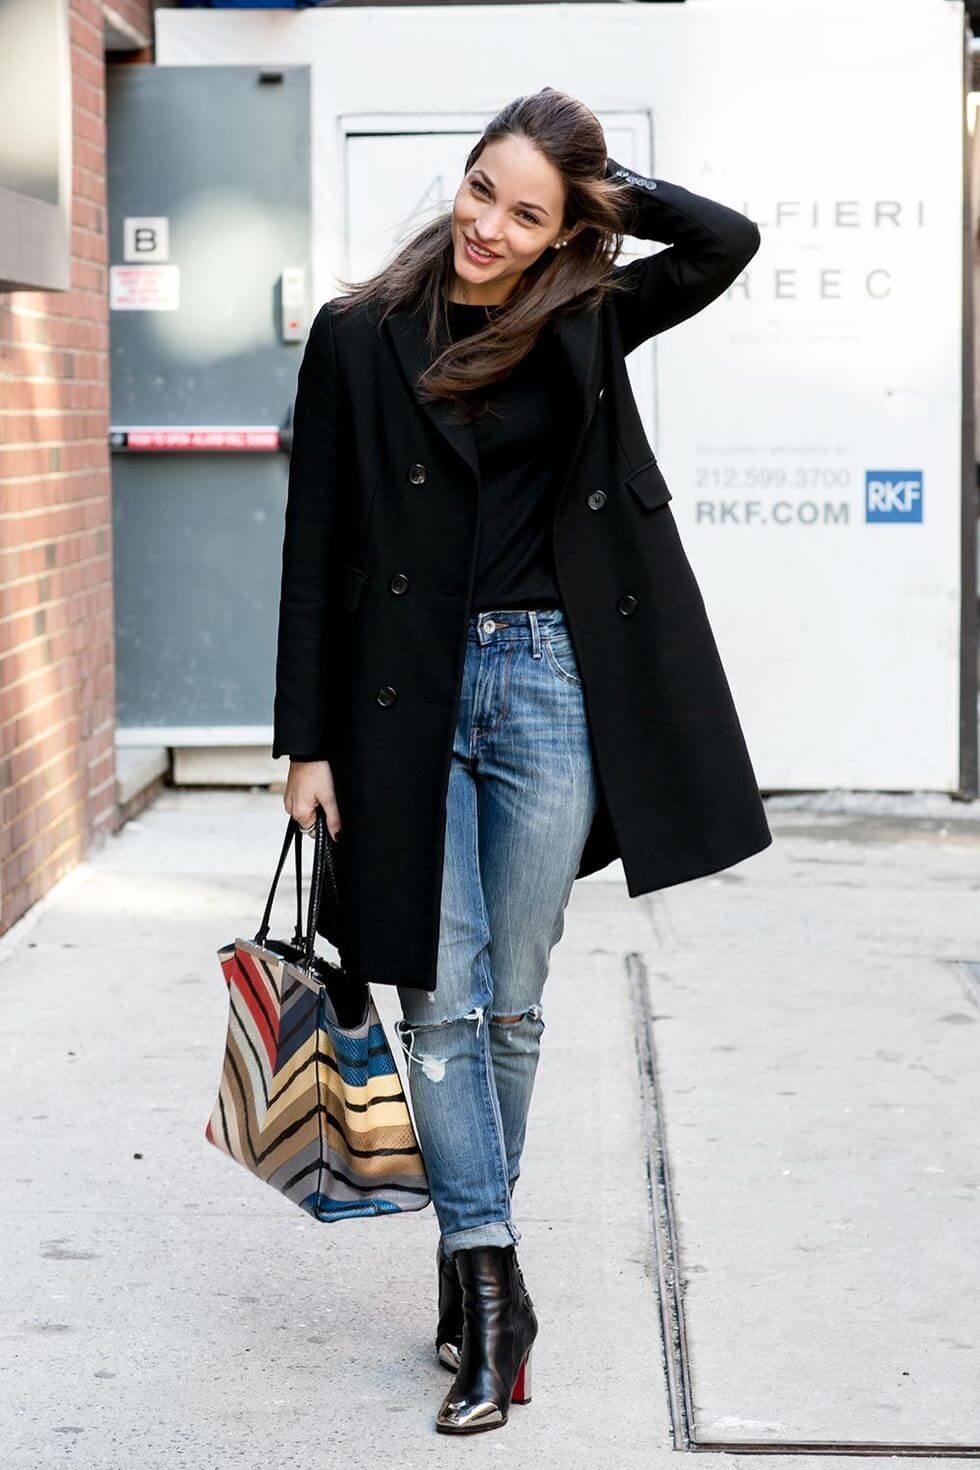 20 Stylish Winter Looks With Ankle Boots u2013 BelleTag